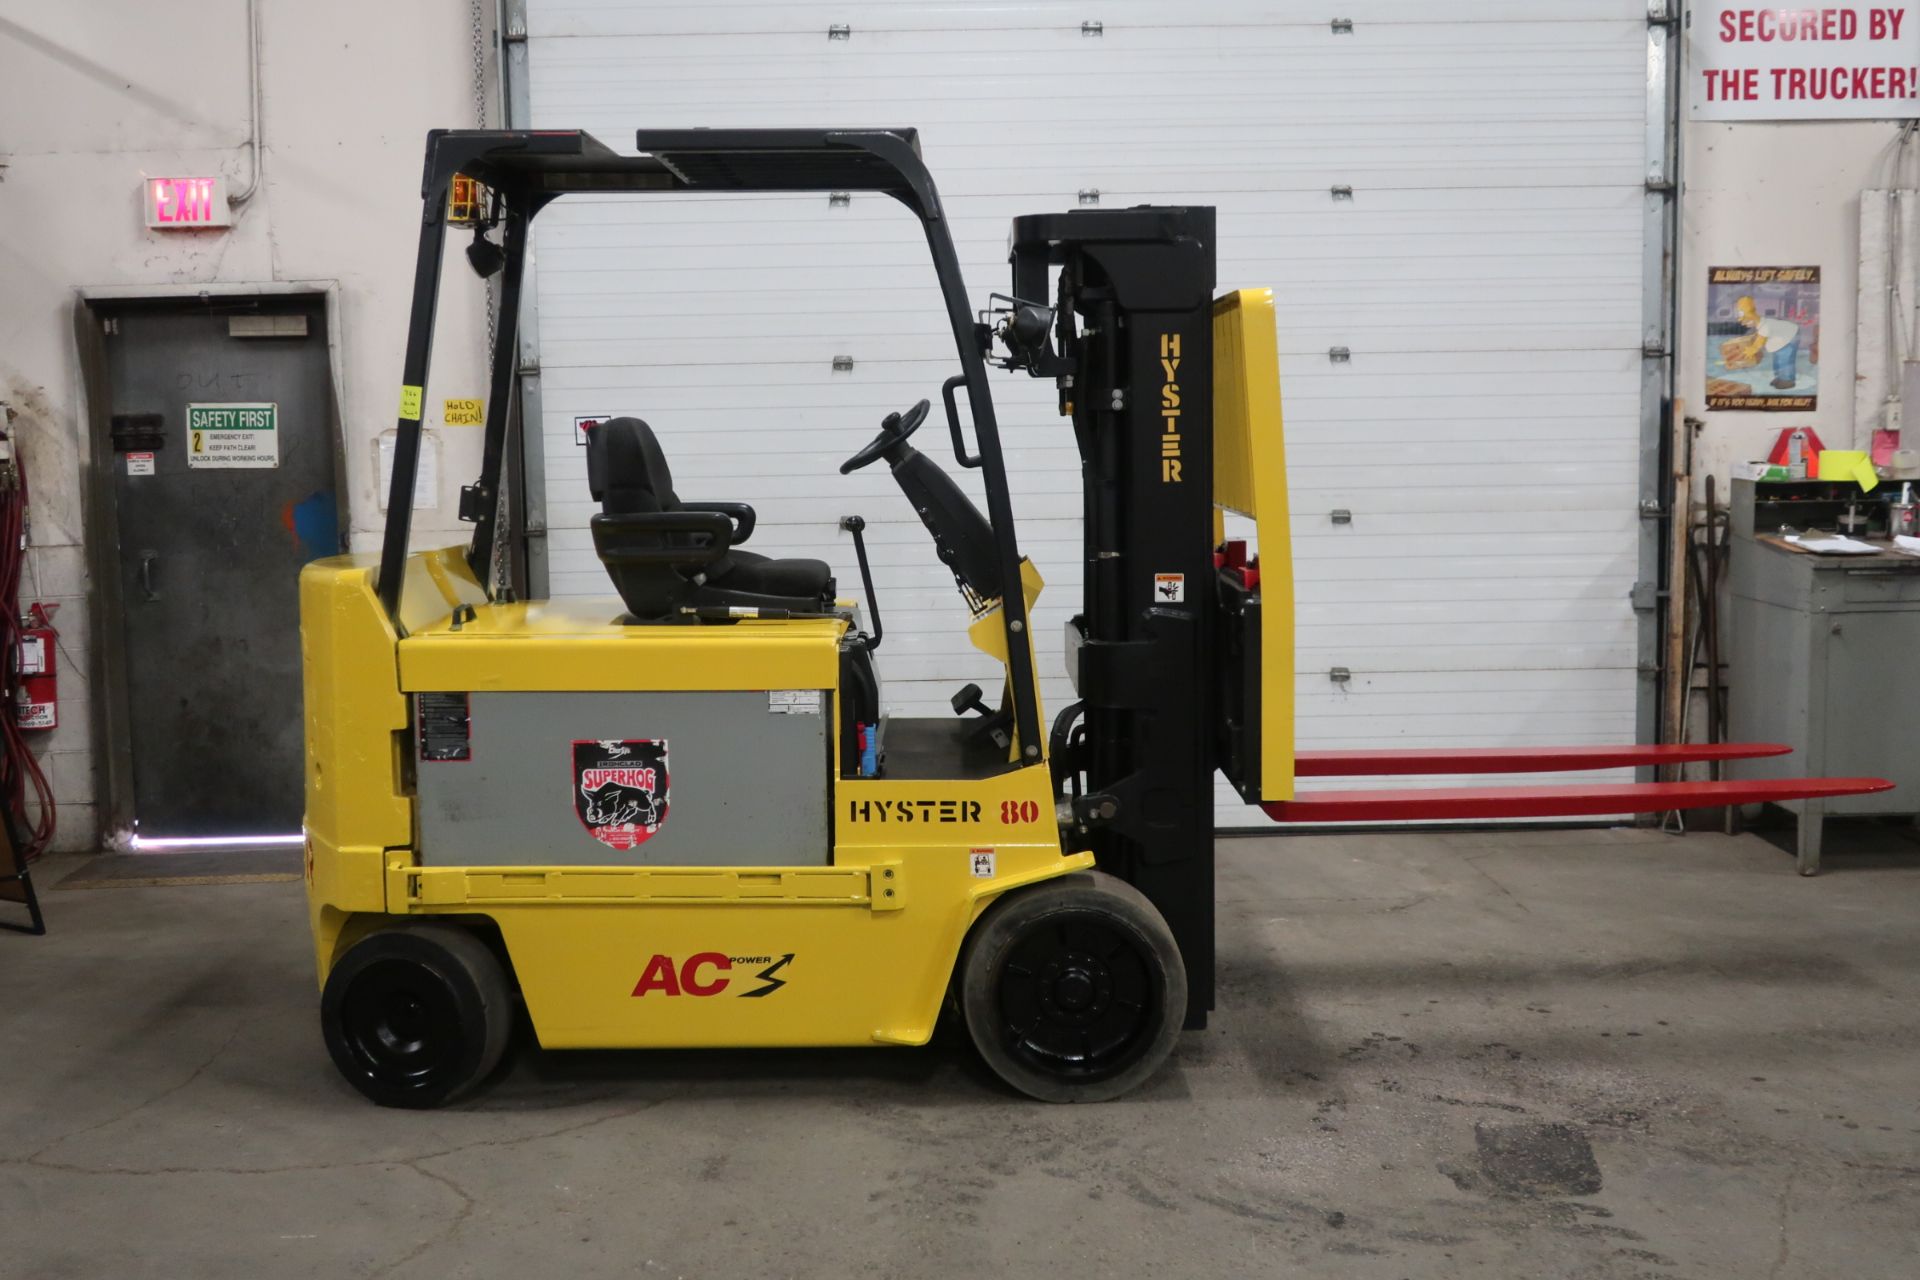 FREE CUSTOMS - 2009 Hyster 8000lbs Capacity Electric Forklift with sideshift and 3-stage mast